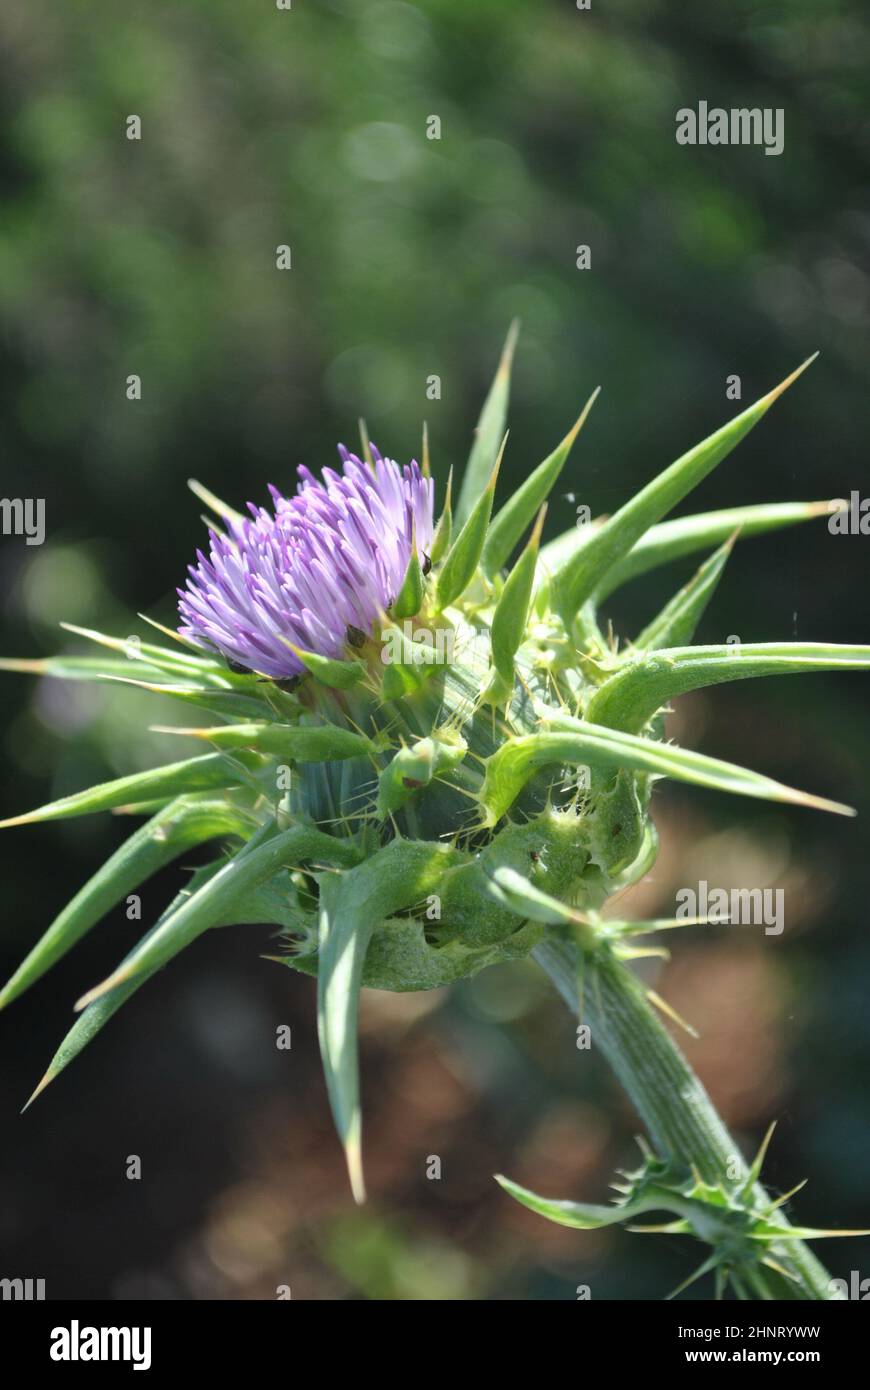 Milk Thistle flower (Silybum marianum or Carduus marianus) blooming in the field. Pruple milk thistle with green background at the botanical garden. Stock Photo